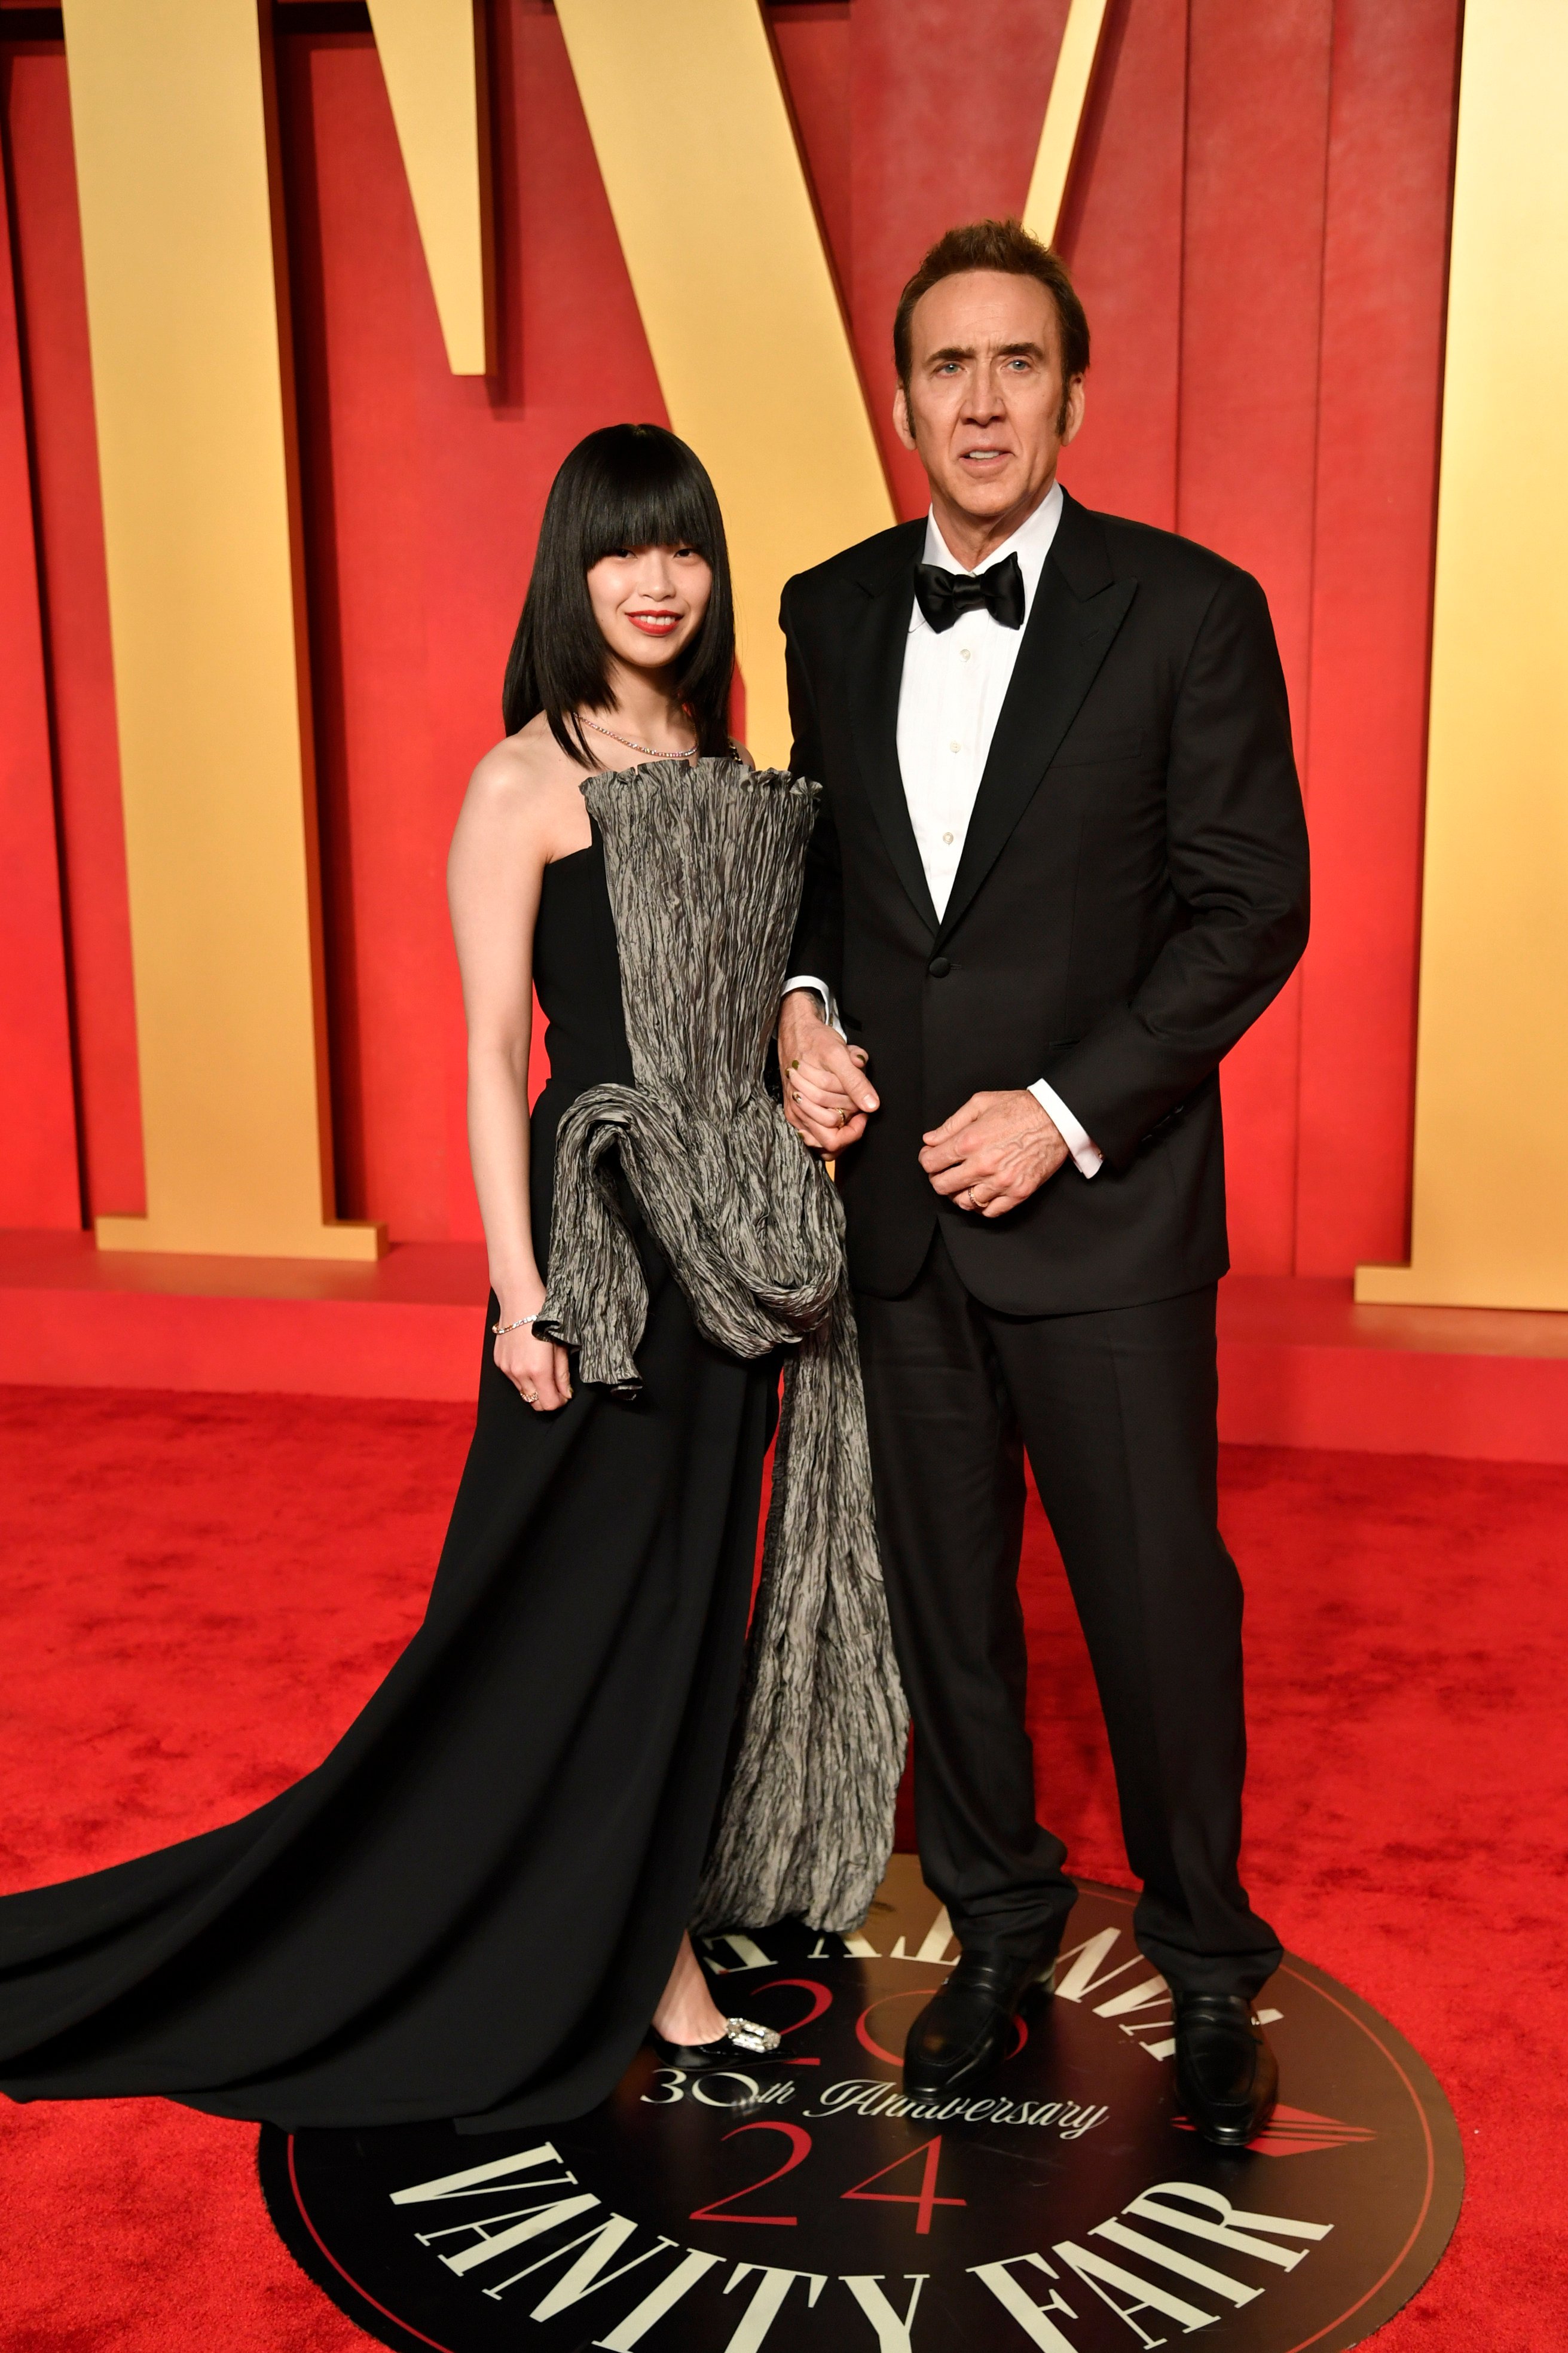 Riko Shibata and her husband Nicolas Cage, who’s 32 years her senior, at the Vanity Fair Oscar Party on Sunday March 10. Photo: Invision/AP